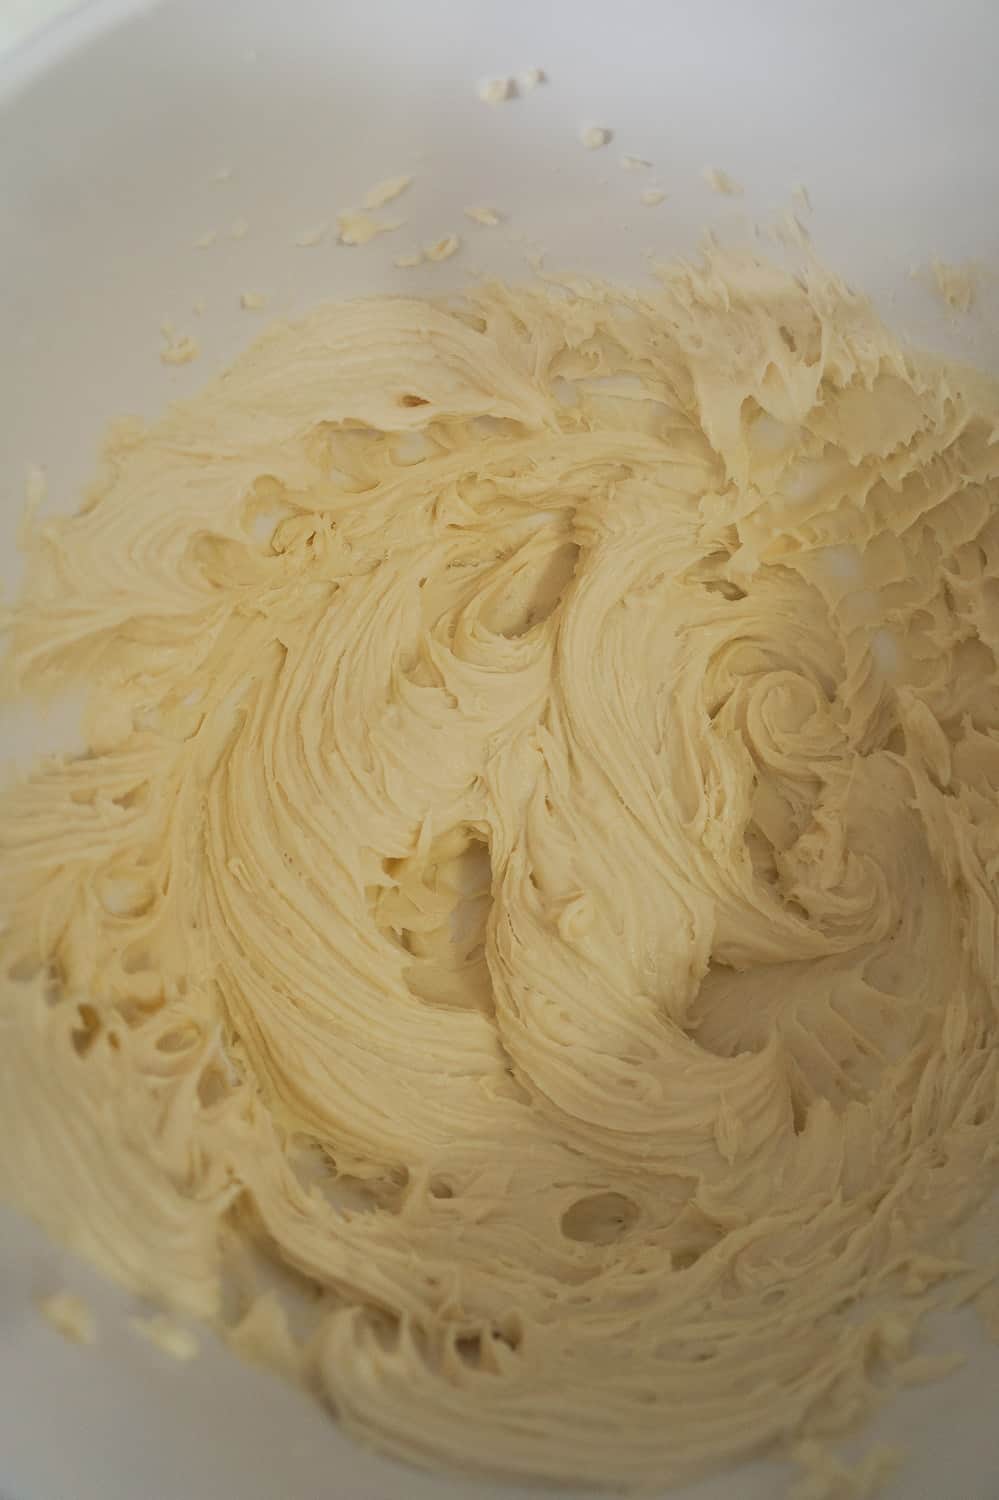 cream cheese, sugar and brown sugar creamed together in a mixing bowl